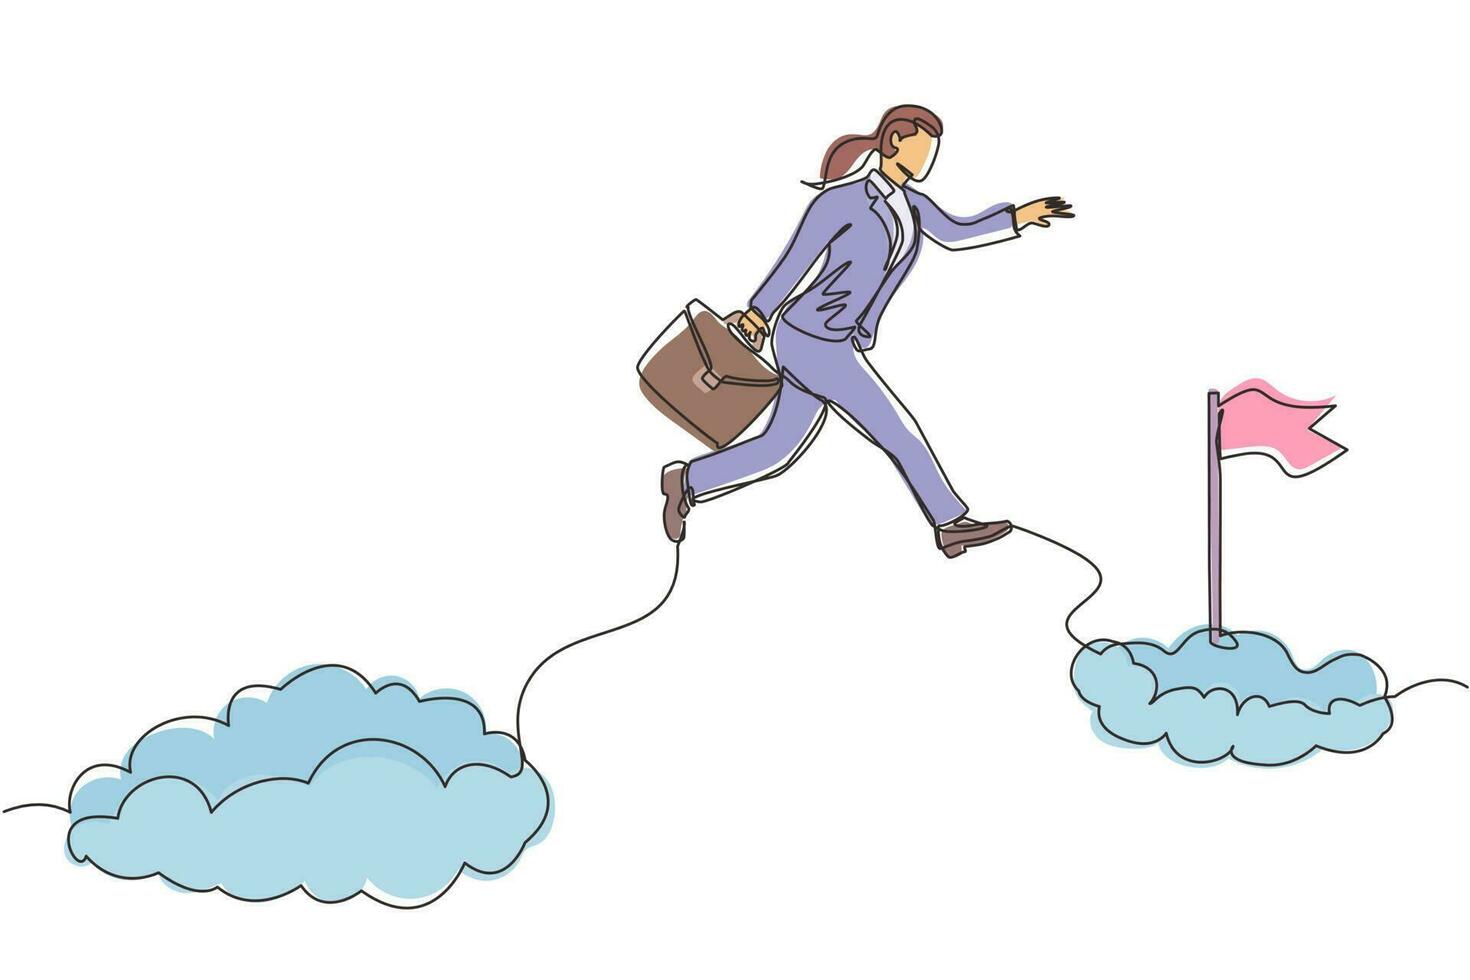 Single one line drawing fearless brave businesswoman make risk by jump over clouds to reach her success target or flag. Challenge of her career. Continuous line draw design graphic vector illustration